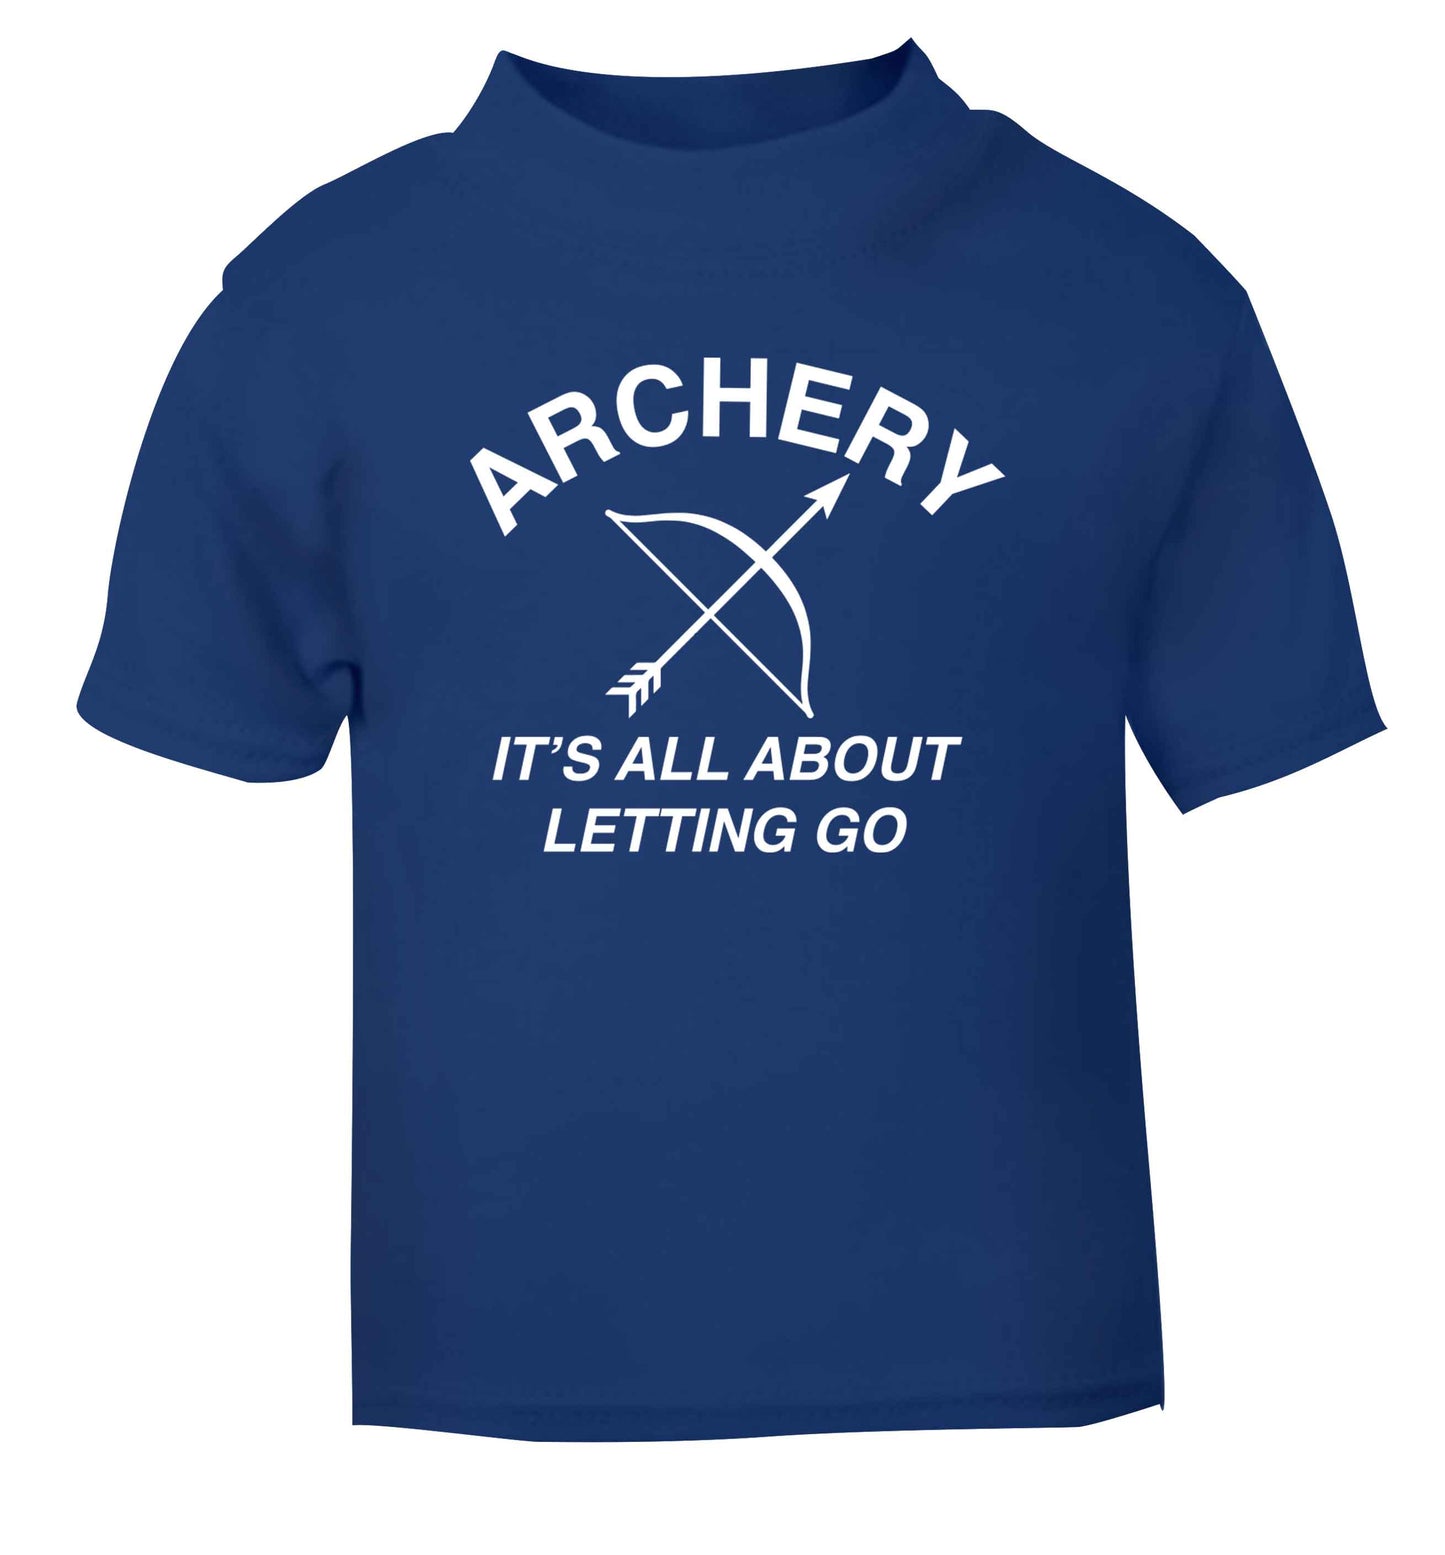 Archery it's all about letting go blue Baby Toddler Tshirt 2 Years